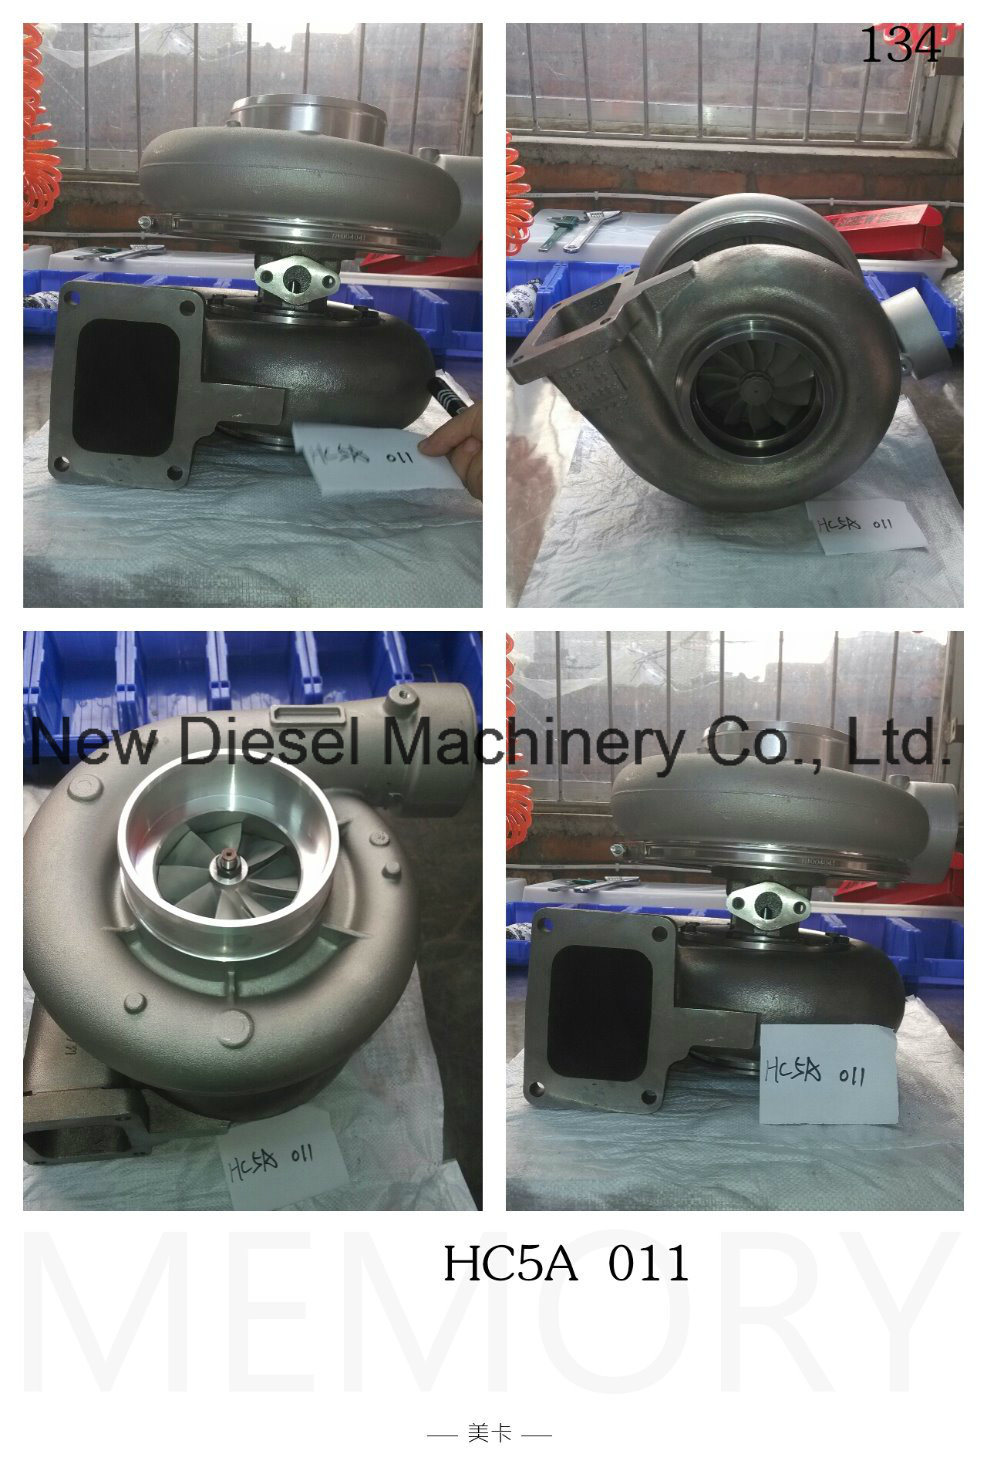 Turbocharger Rhf4 Vp20 97300197 Turbo Charger Factory for Car Truck Tractor Alibaba China OEM Model